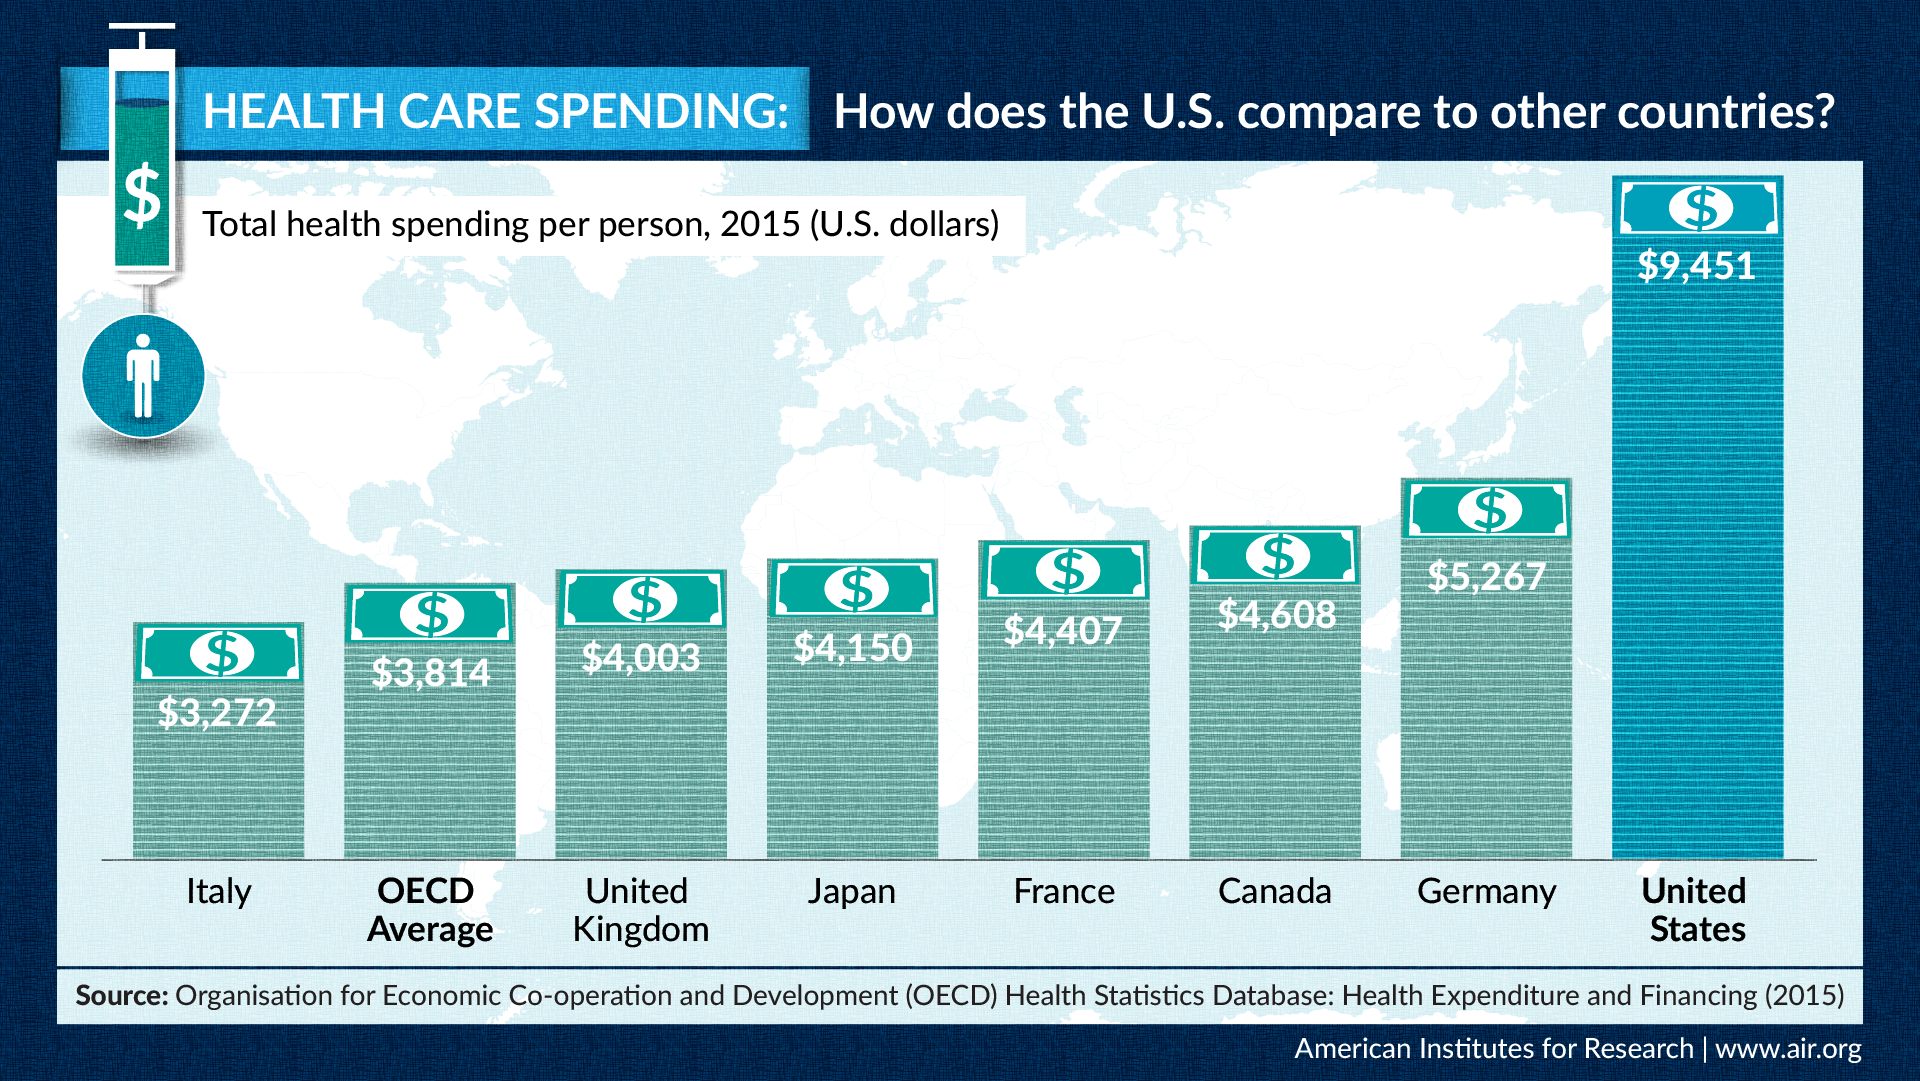 Infographic: Health Care Spending: How does the U.S. compare to other countries? Total health spending per person, 2015 (U.S. dollars)Italy	3272 OECD Average	3814 United Kingdom	4003 Japan	4150 France	4407 Canada	4608 Germany	5267 United States	9451